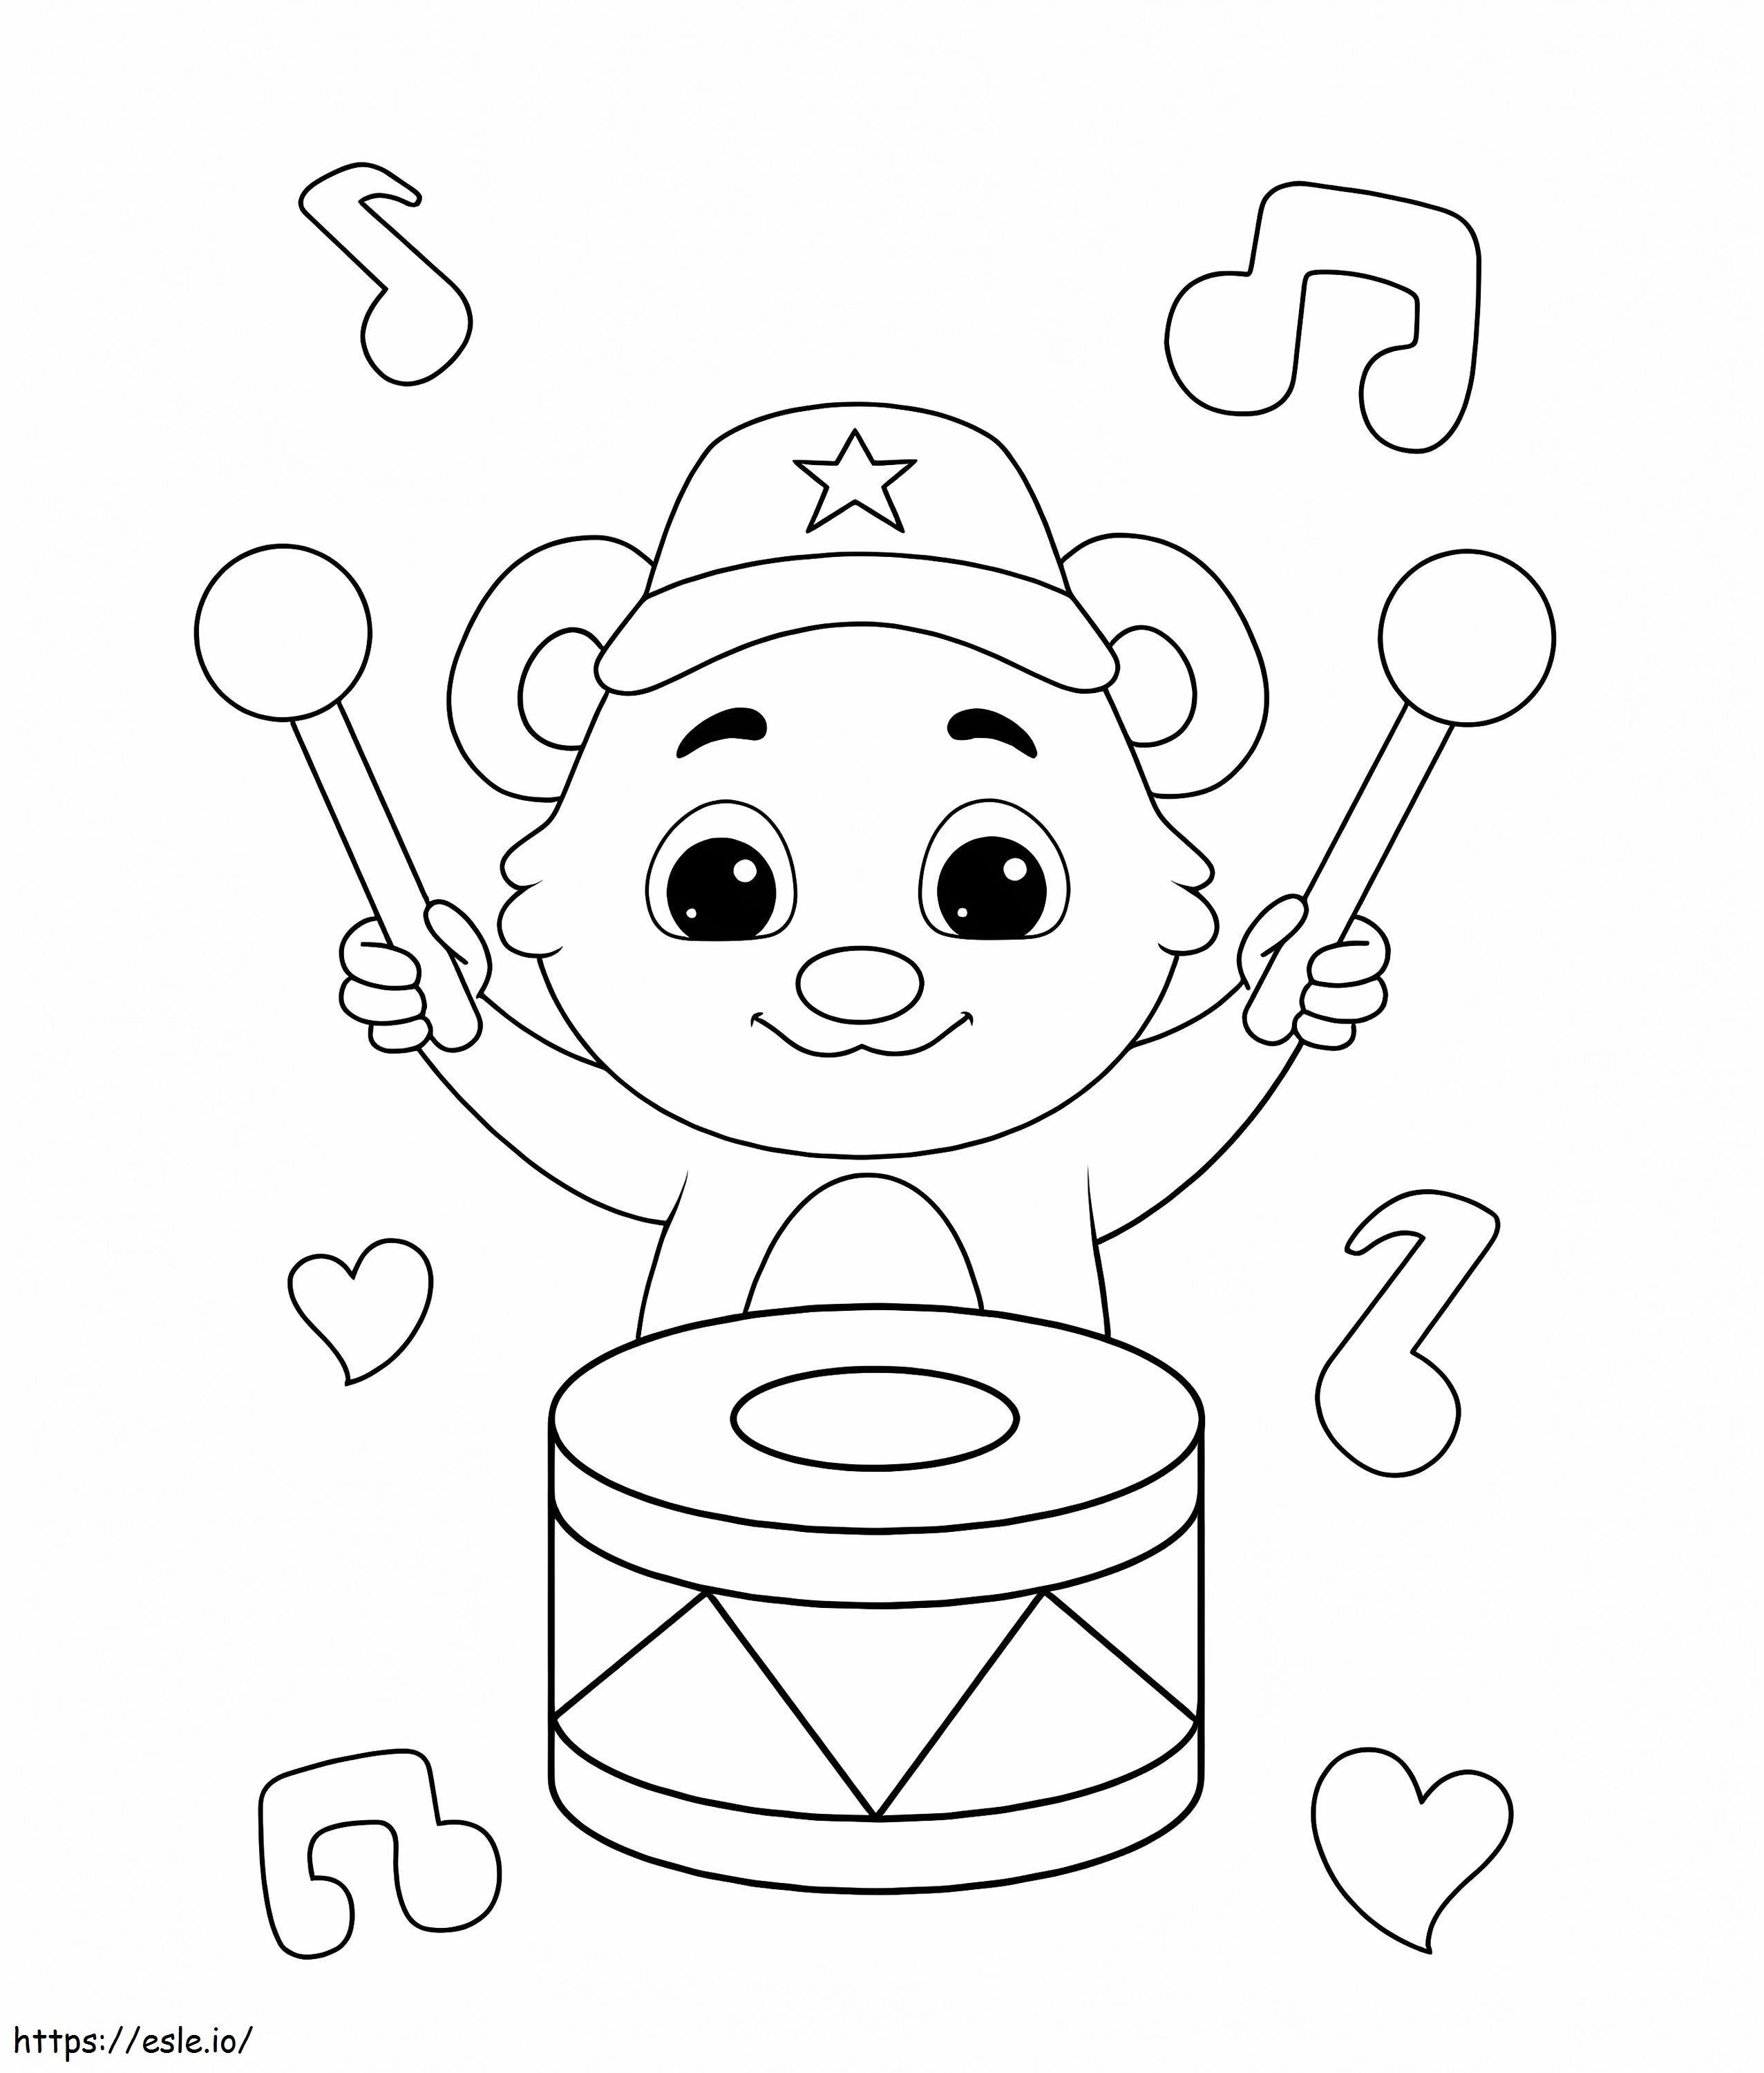 Bear Playing The Drum coloring page